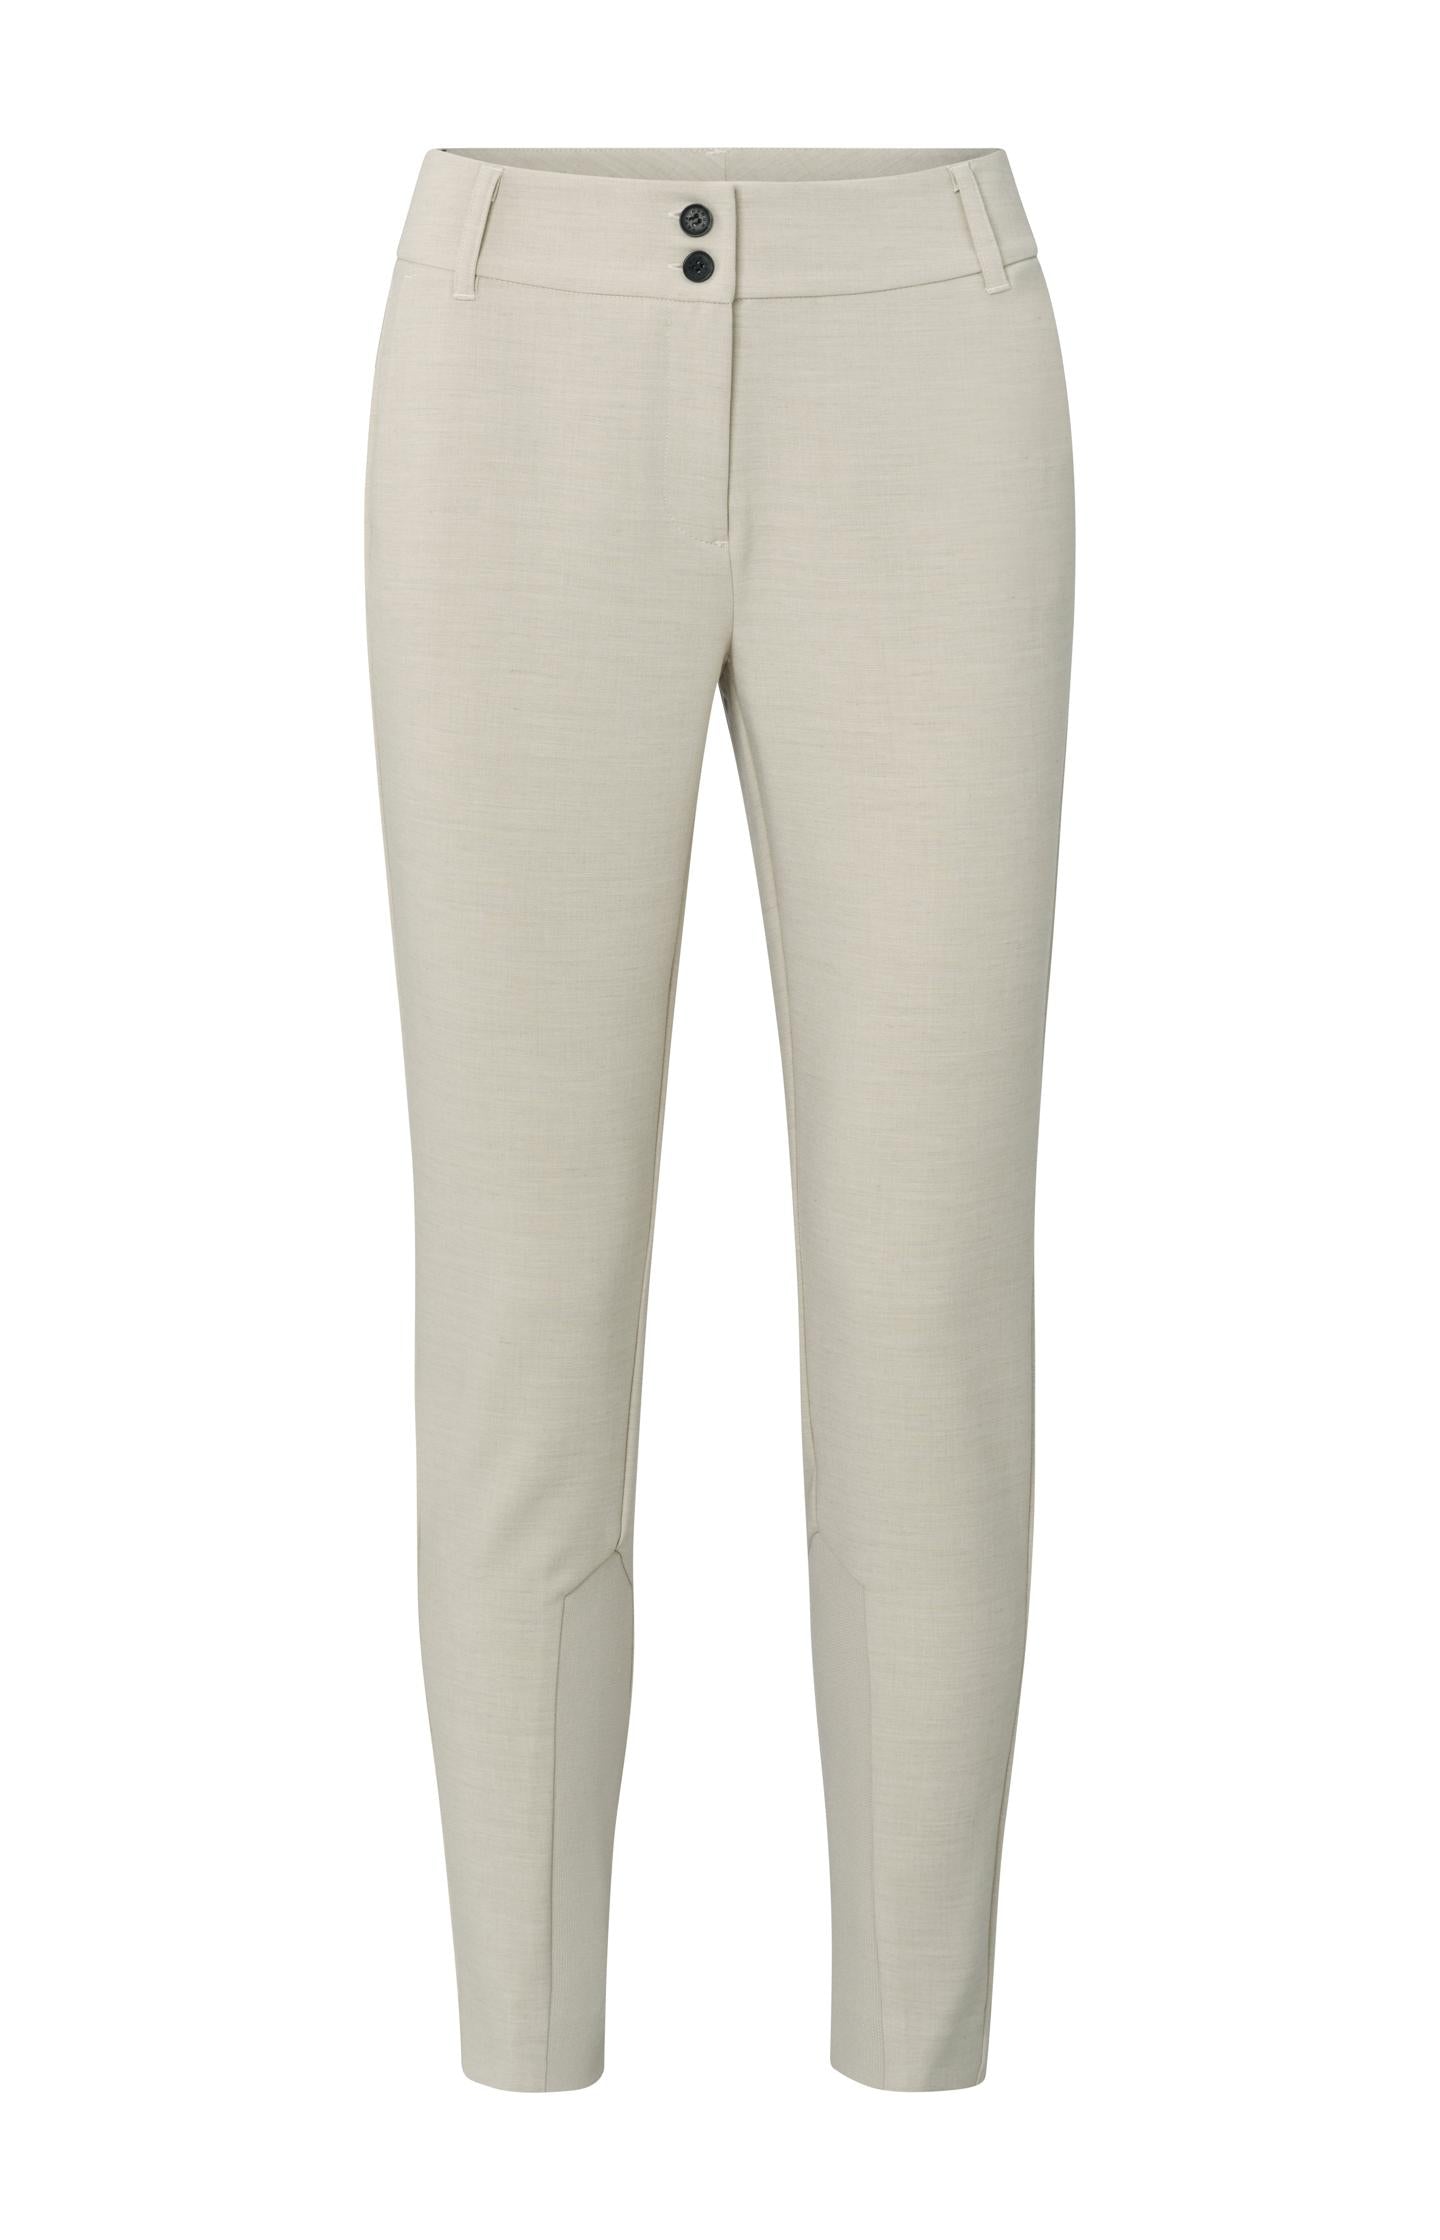 YAYA Soft cargo trousers with zip fly and pockets